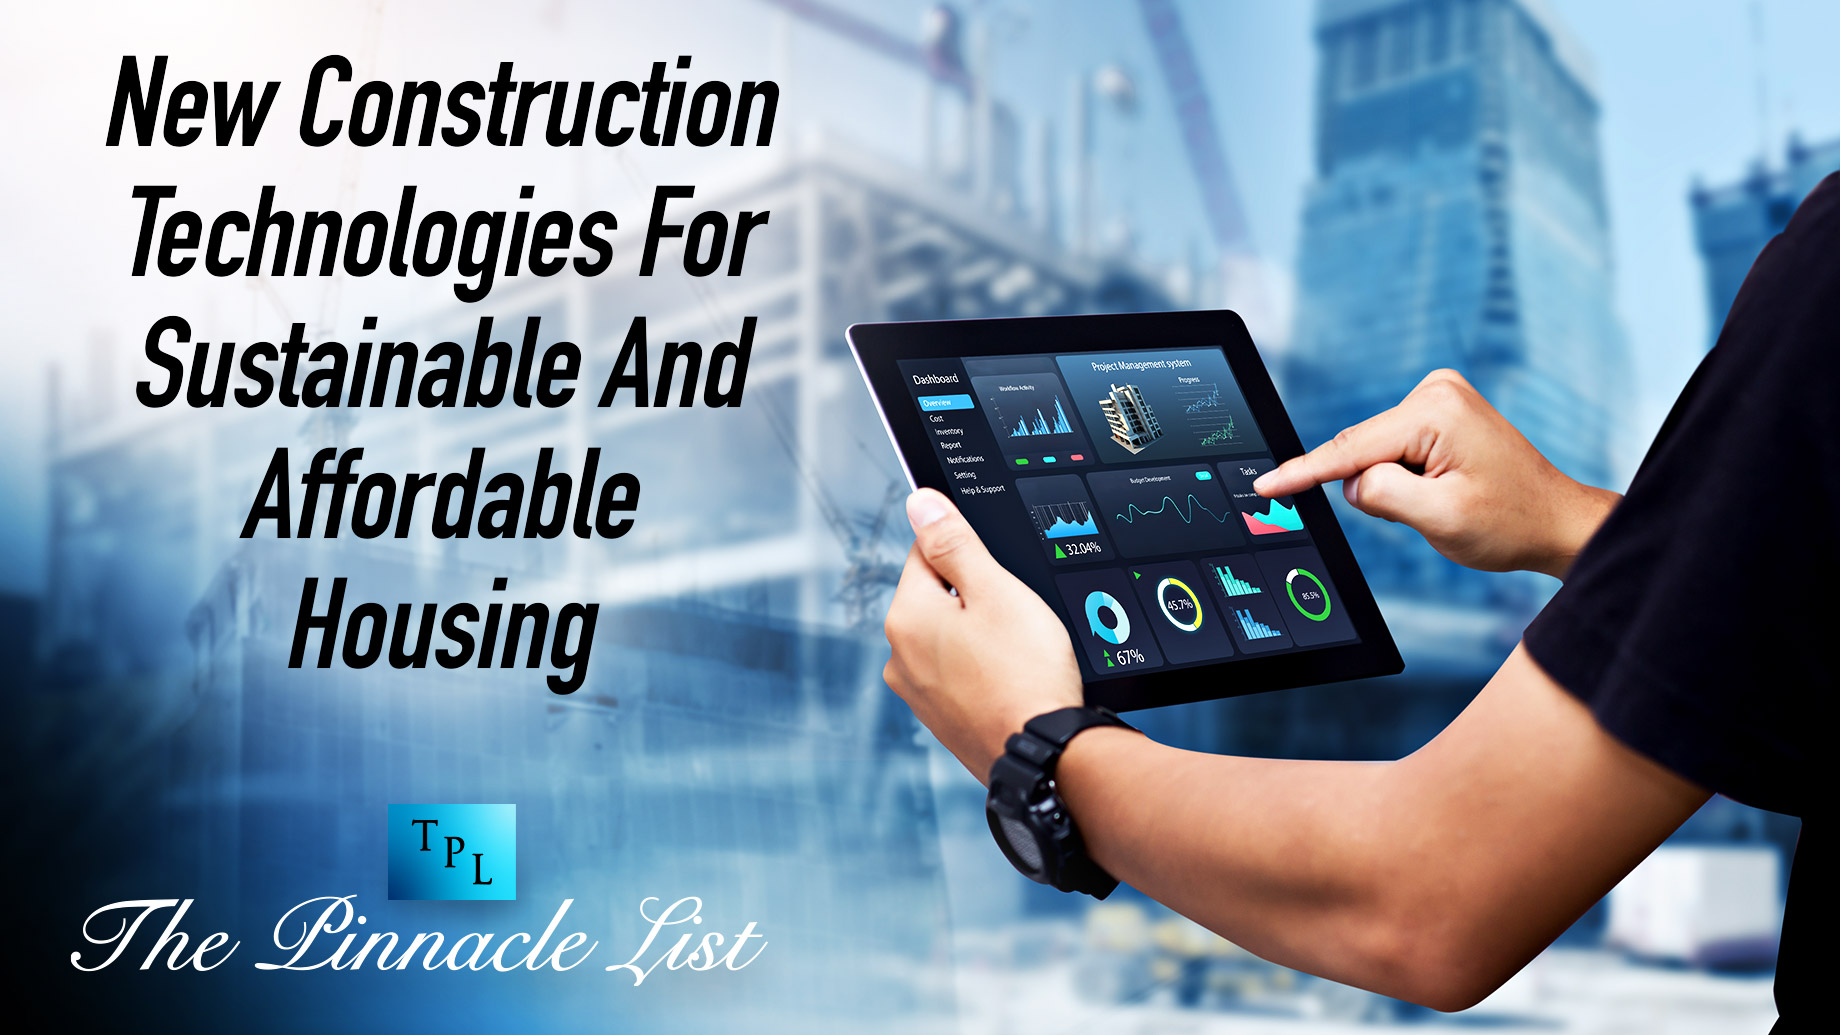 New Construction Technologies For Sustainable And Affordable Housing